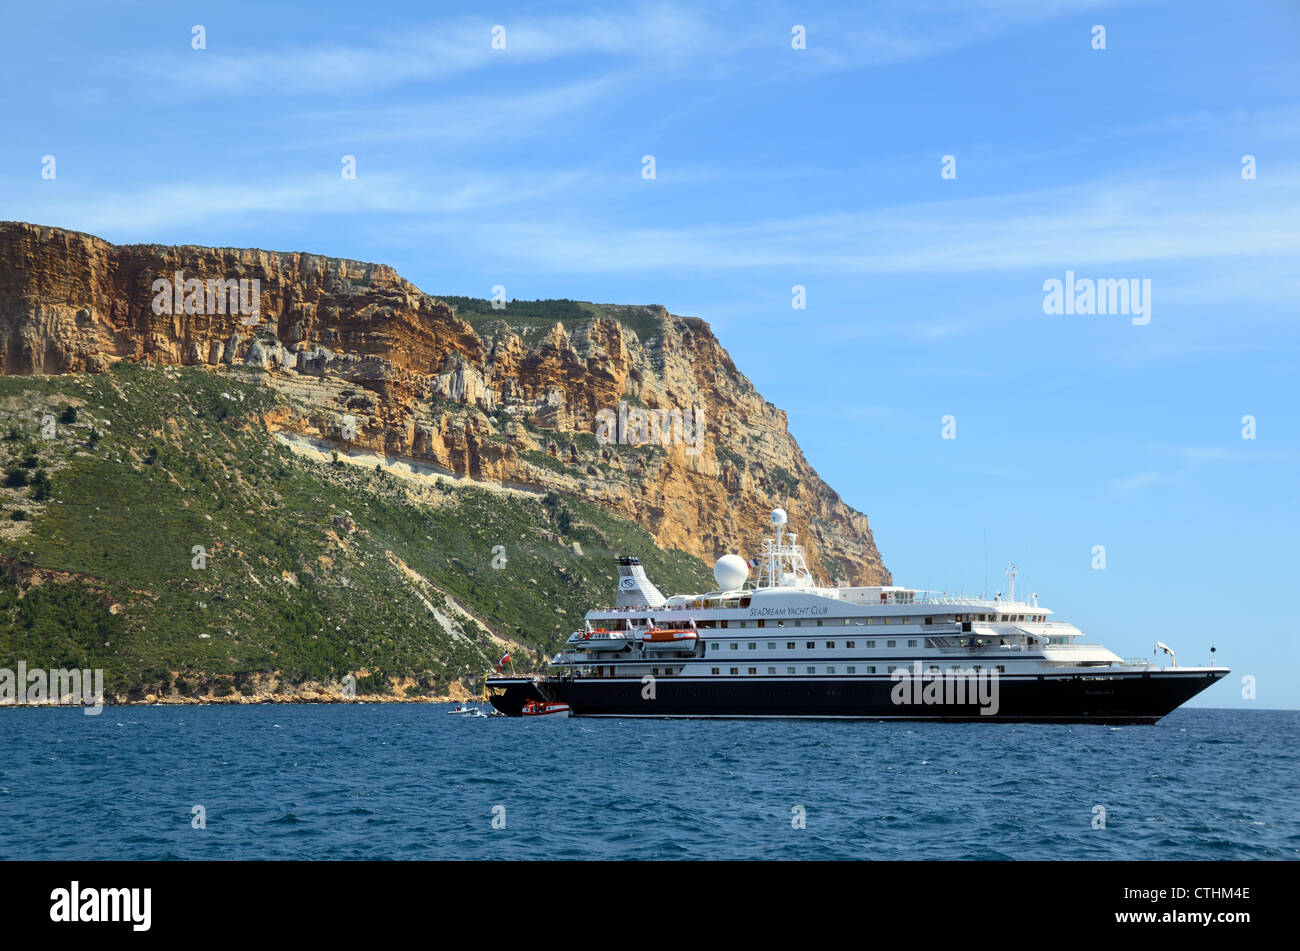 Cap Canaille Cliffs & Cruise Ship in the Bay of Cassis Mediterranean Sea in the Calanques National Park Bouches-du-Rhône Provence France Stock Photo